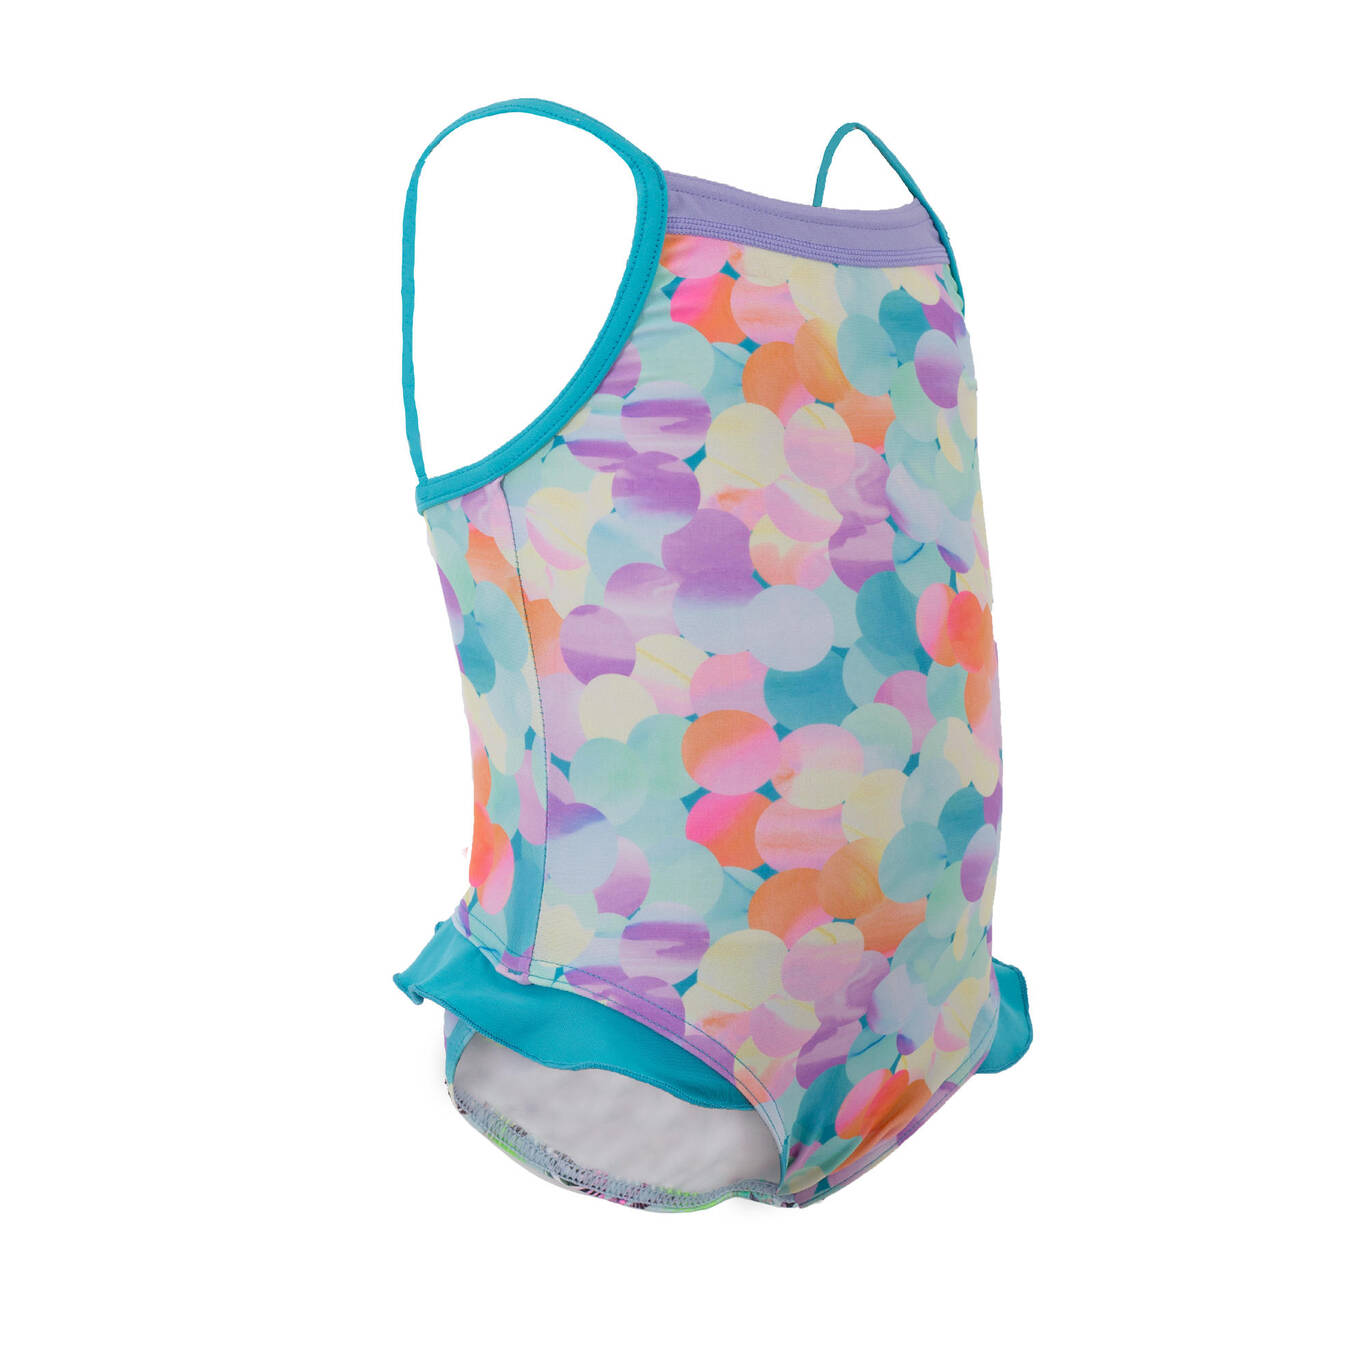 Light blue baby girl's one-piece Madina printed swimsuit